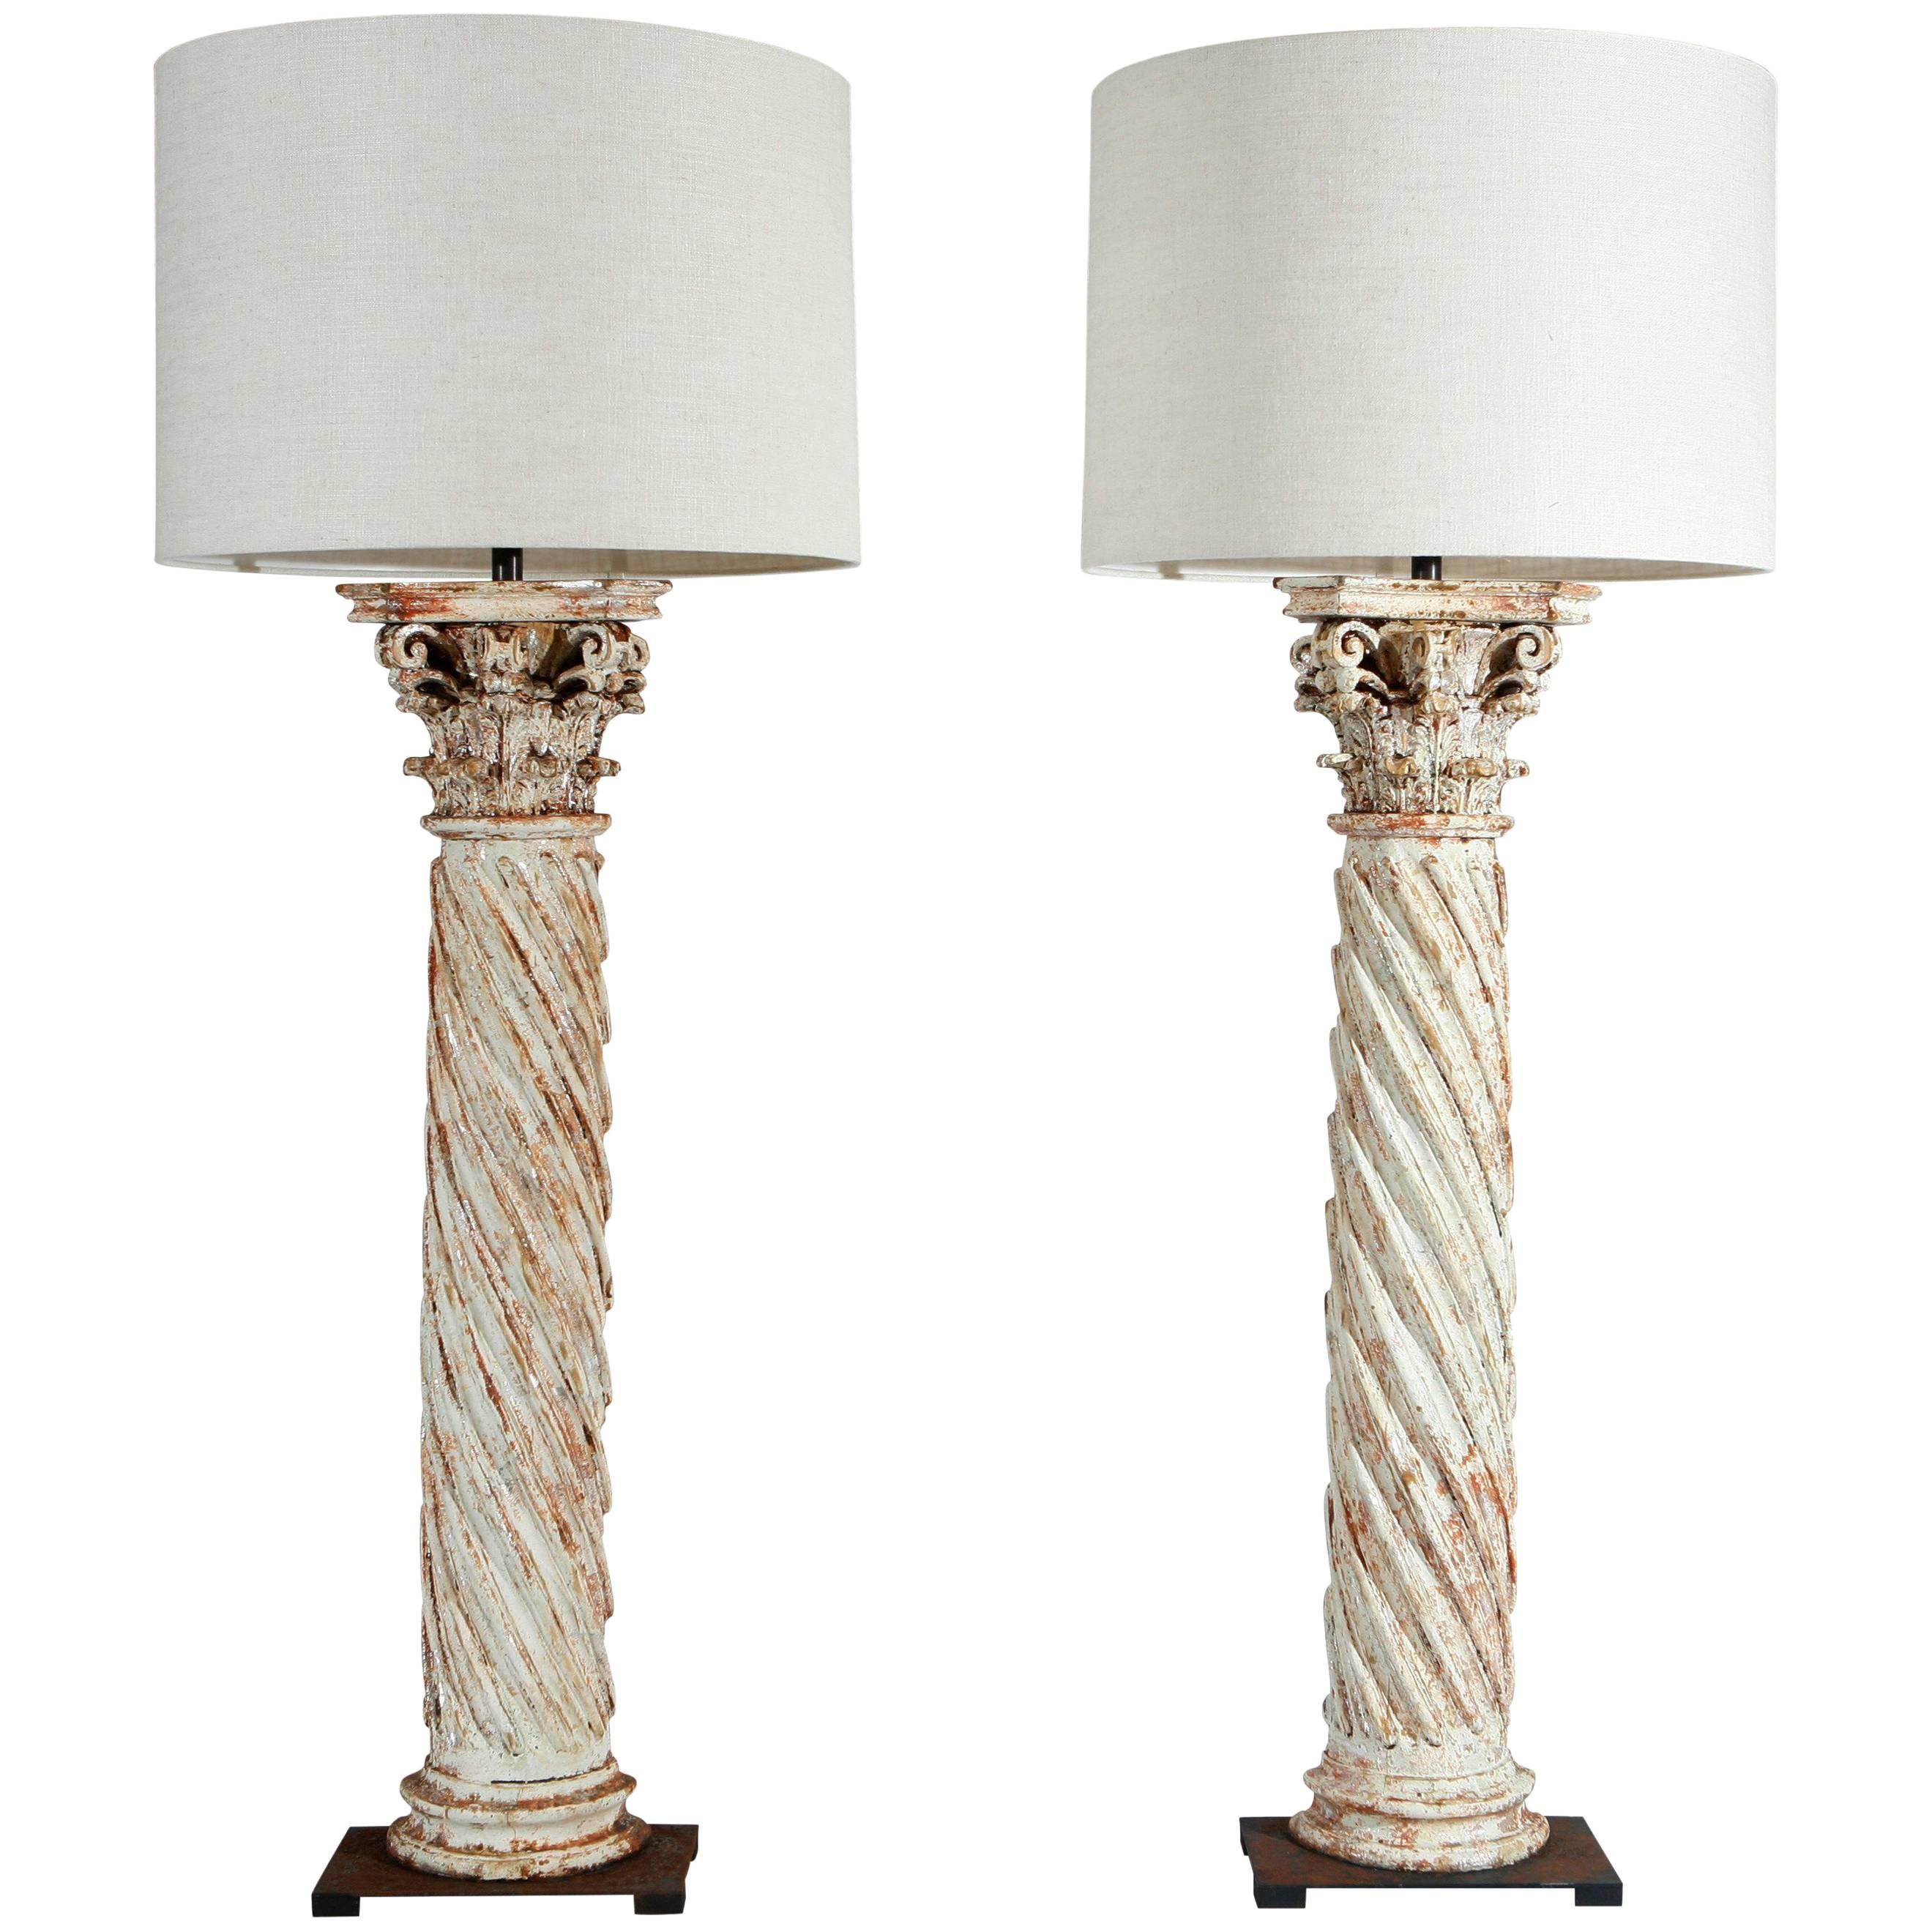 Pair of Half Column Floor Lamps For Sale at 1stDibs